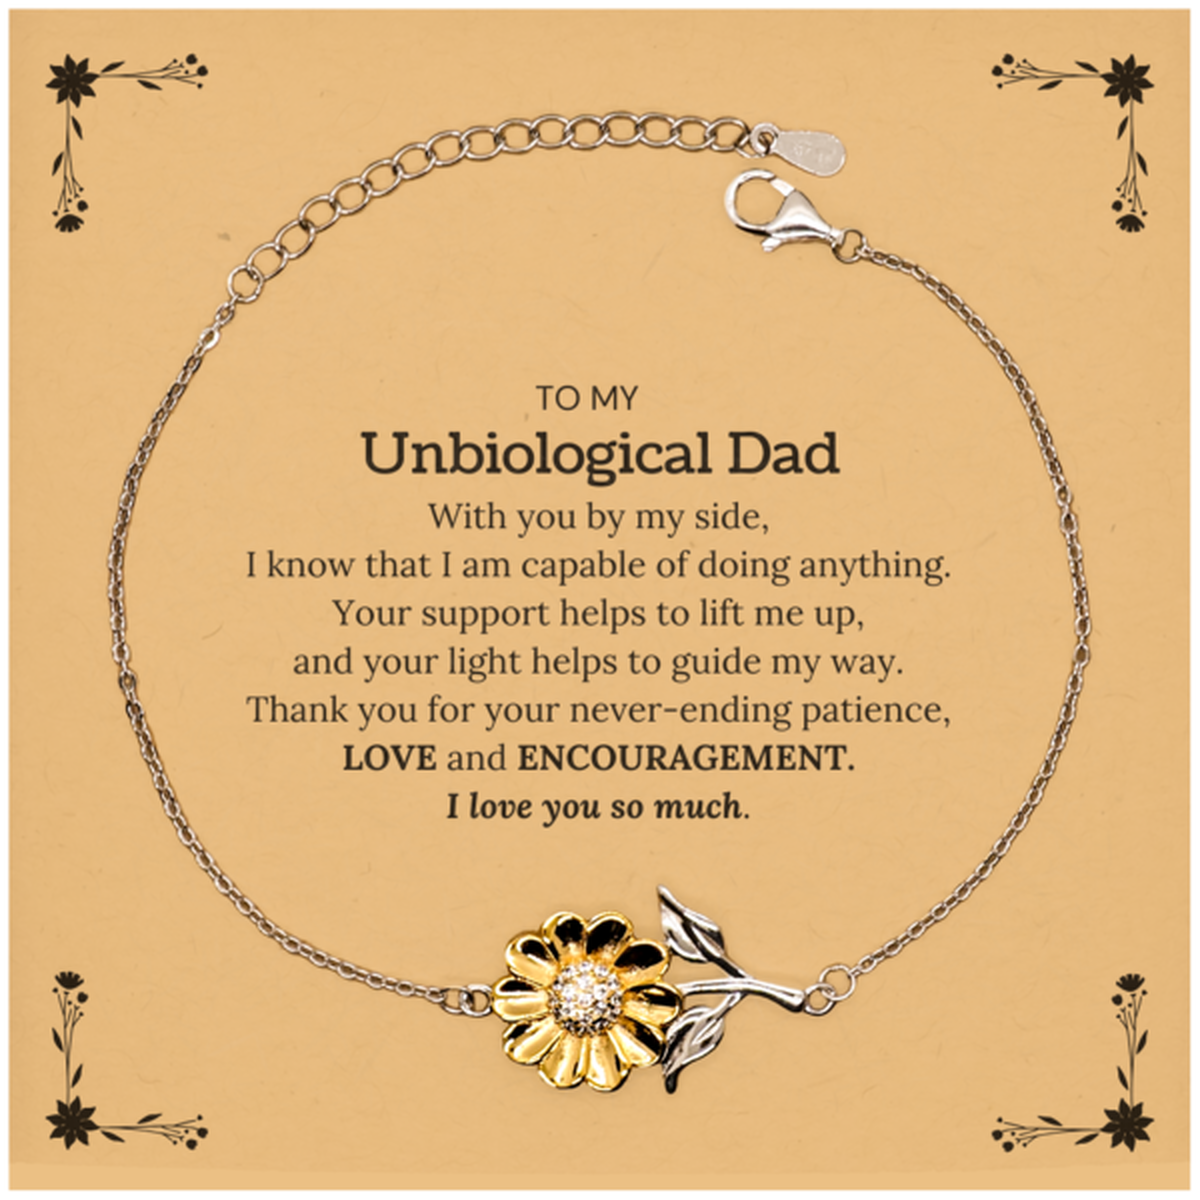 Appreciation Unbiological Dad Sunflower Bracelet Gifts, To My Unbiological Dad Birthday Christmas Wedding Keepsake Gifts for Unbiological Dad With you by my side, I know that I am capable of doing anything. I love you so much